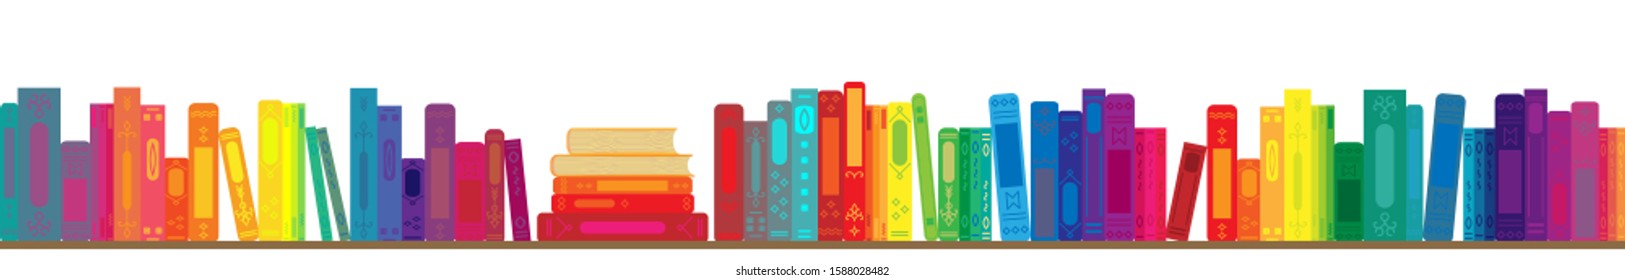 vector illustration of rainbow color books in line horizontal design for library or bookstore